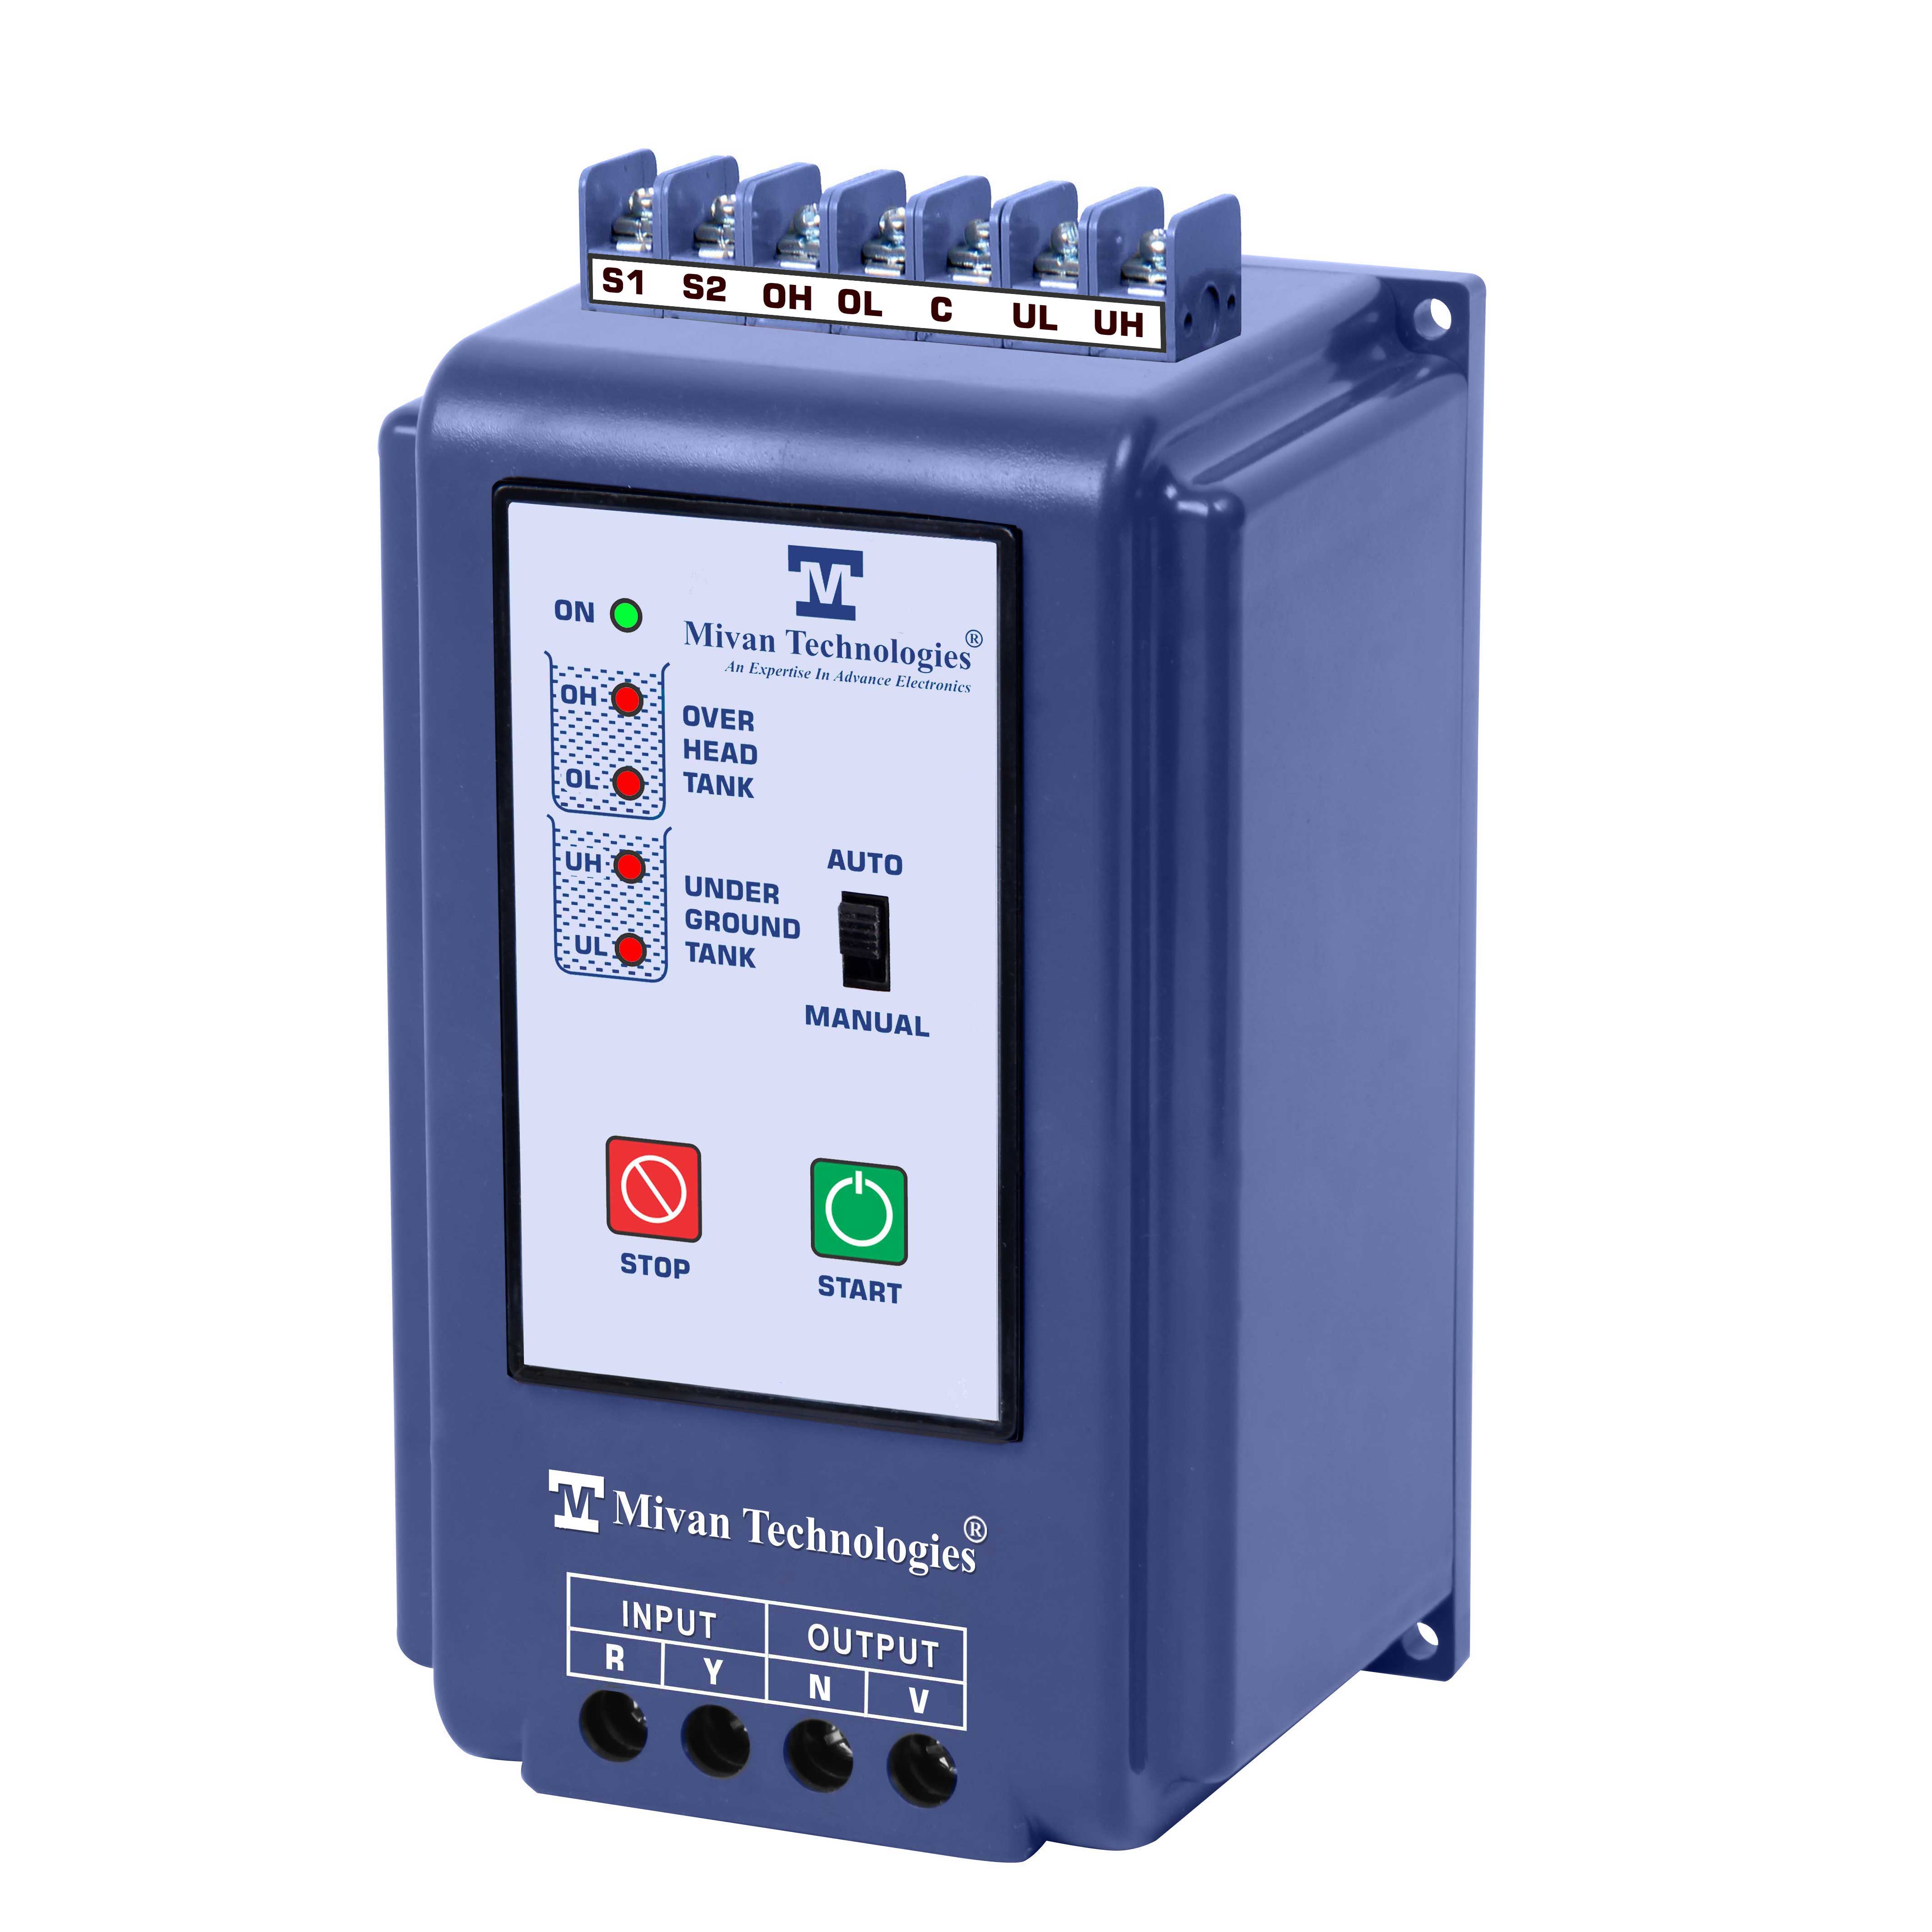 LLC 3 ABS HD three phase water level controller for 3 phase motor and submersible pump suitable for any 3 phase starter